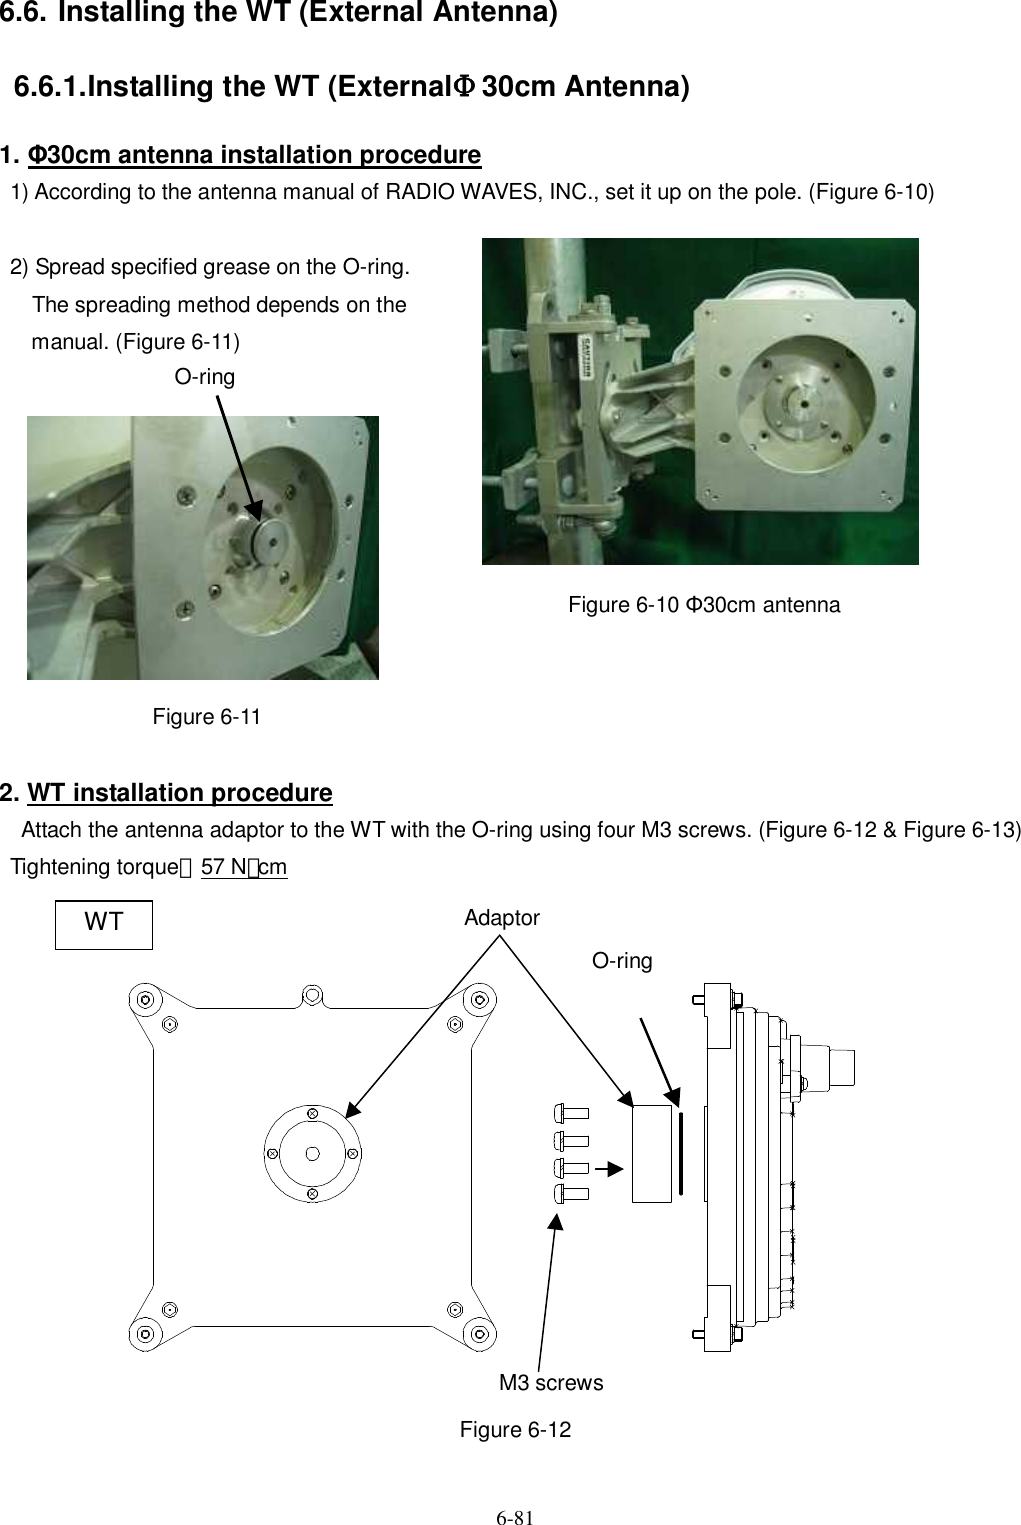   6-81 6.6. Installing the WT (External Antenna) 6.6.1. Installing the WT (ExternalΦ30cm Antenna) 1. Φ30cm antenna installation procedure 1) According to the antenna manual of RADIO WAVES, INC., set it up on the pole. (Figure 6-10)    2) Spread specified grease on the O-ring.       The spreading method depends on the   manual. (Figure 6-11)                                              Figure 6-10 Φ30cm antenna             Figure 6-11      2. WT installation procedure   Attach the antenna adaptor to the WT with the O-ring using four M3 screws. (Figure 6-12 &amp; Figure 6-13)   Tightening torque：57 N･cm                   Figure 6-12 M3 screws O-ring Adaptor WT O-ring 